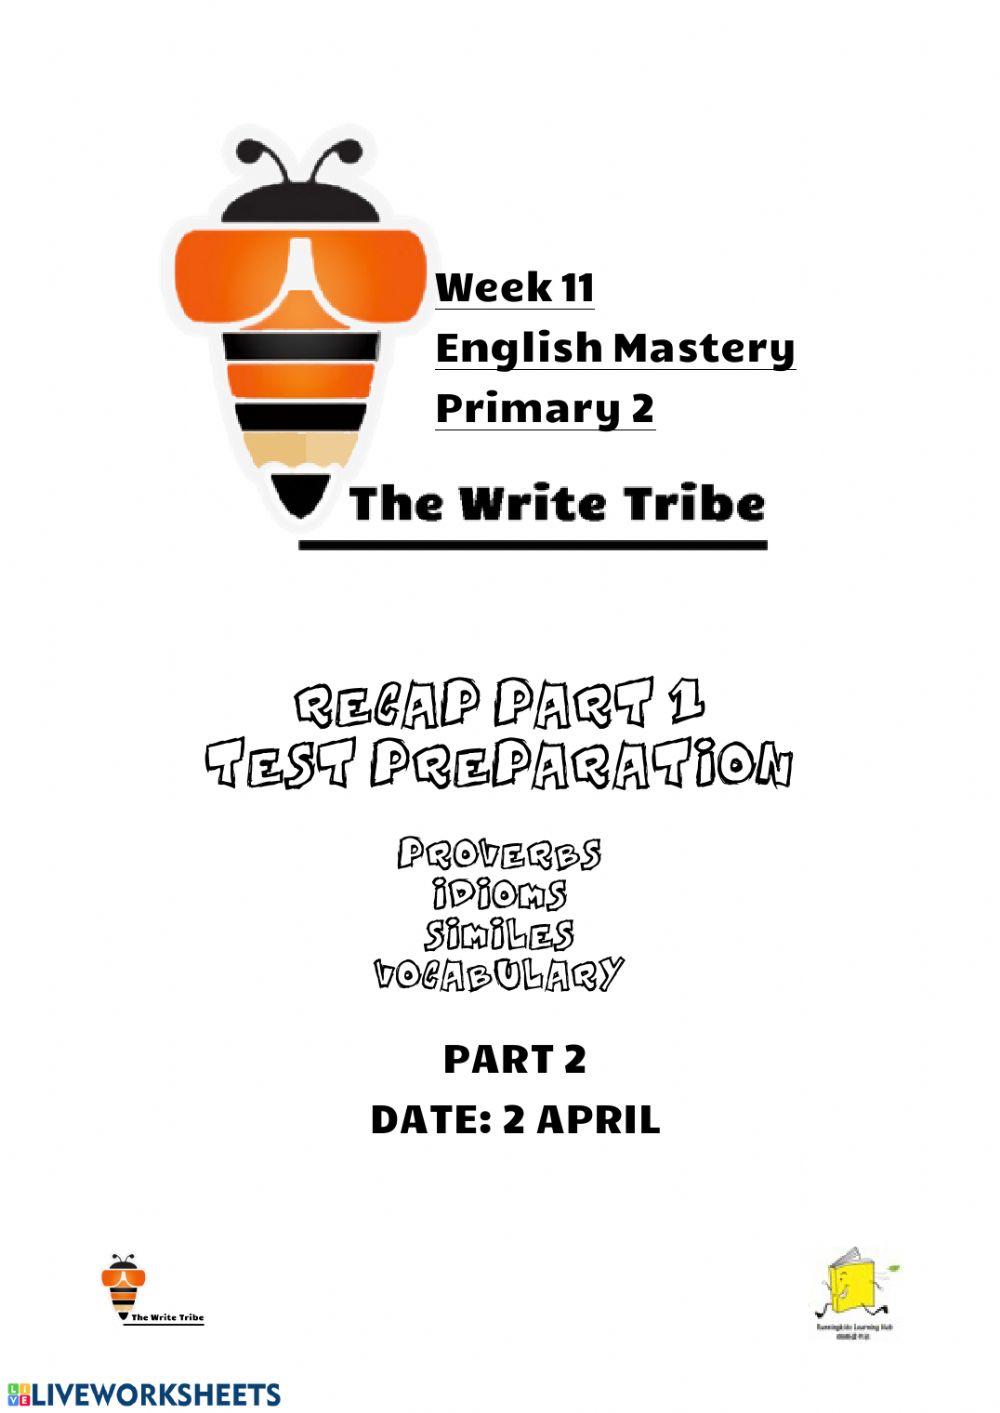 Week 11 e-learning p3-4 part 2